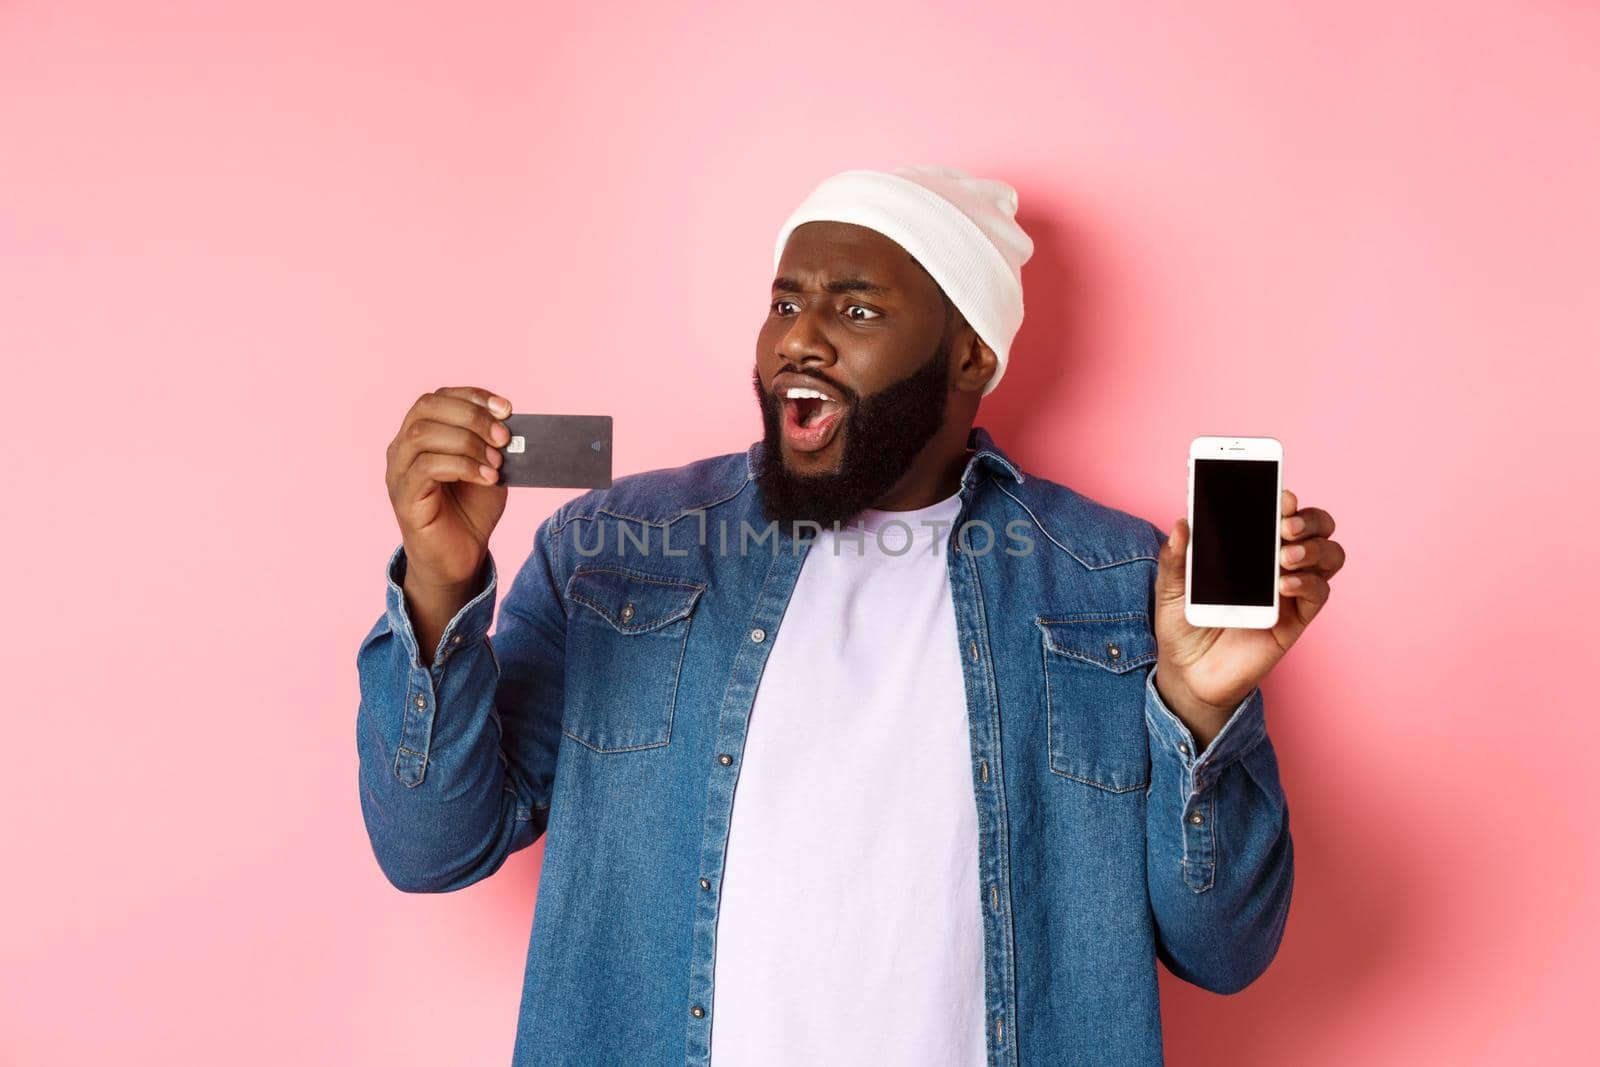 Online shopping. Shocked Black man showing mobile phone screen, looking startled at credit card, standing in hipster clothes against pink background.